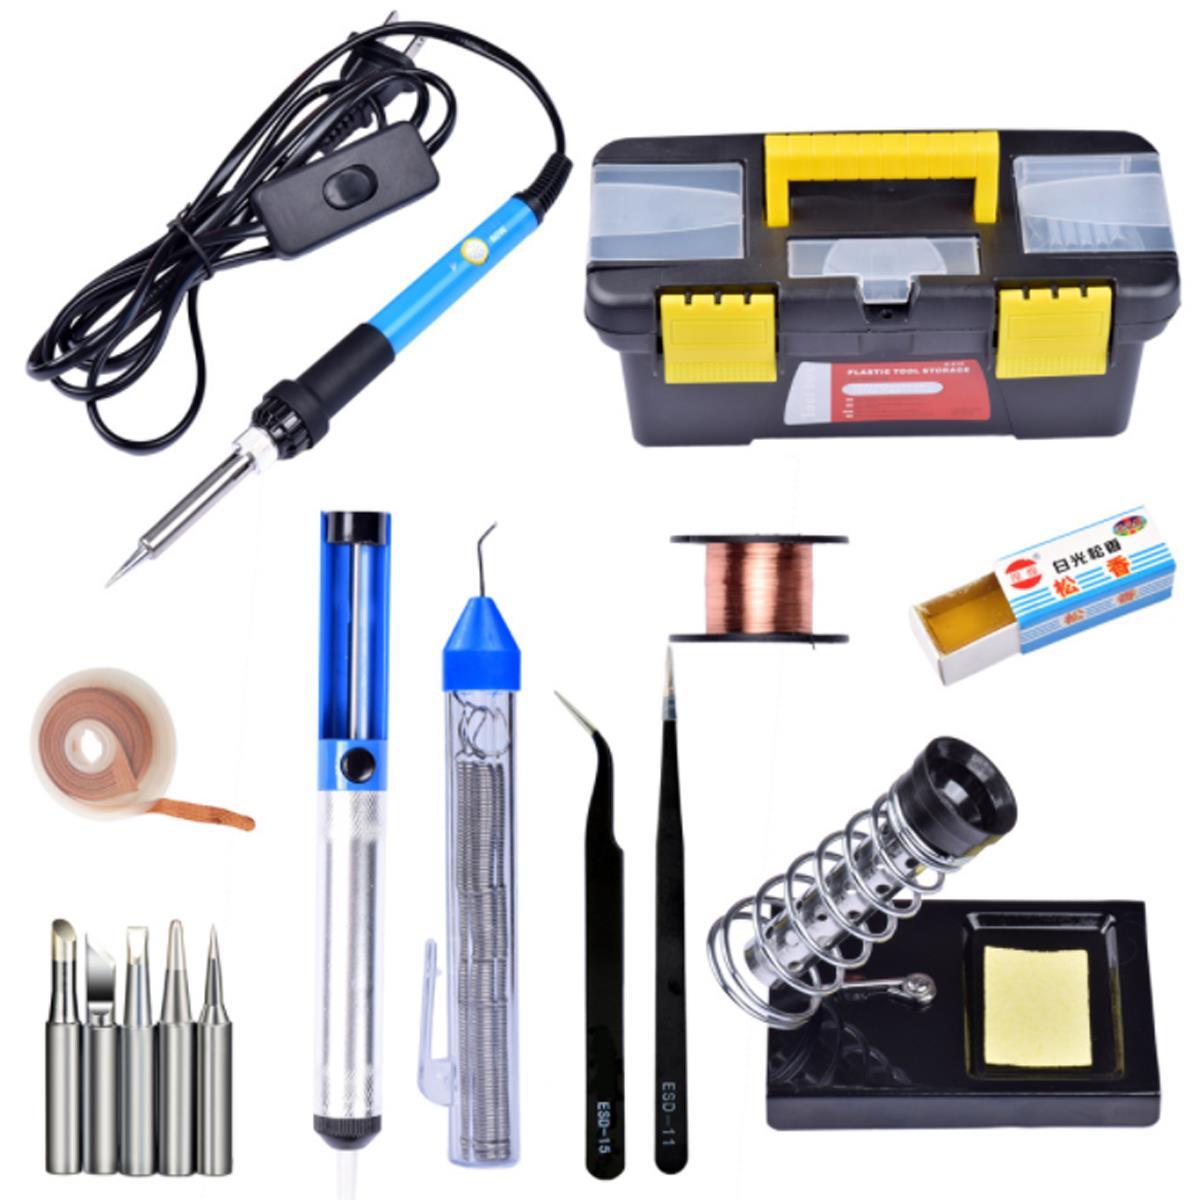 110/220V 60W Adjustable Temperature Electric Welding Soldering Tools Kit with Switch 2